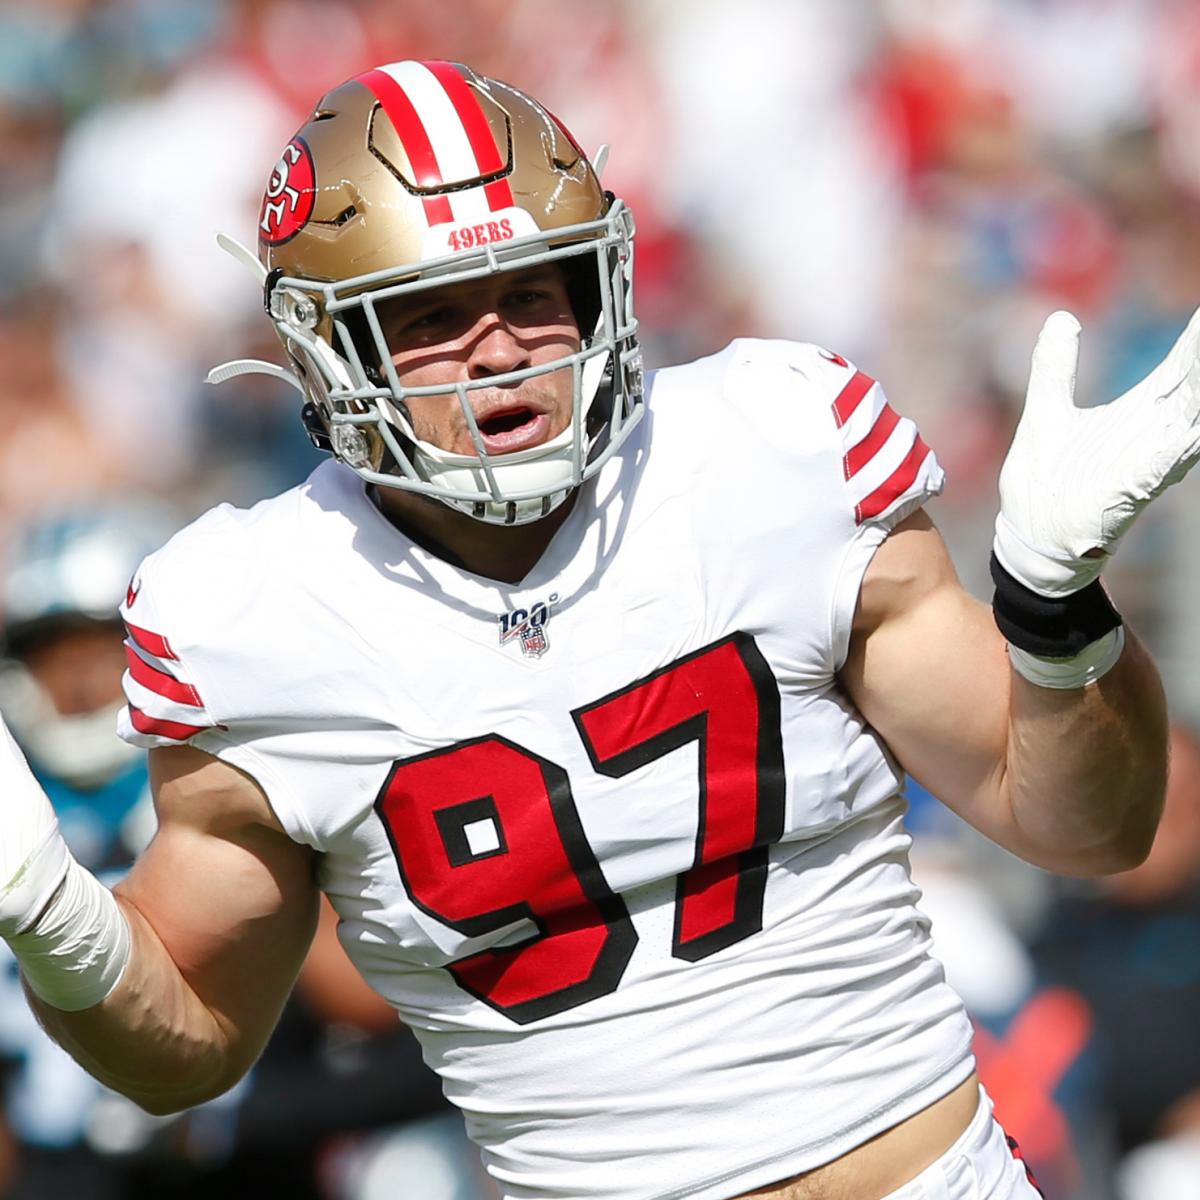 Like Brother, Nick Bosa Emerging as One of NFL's Dominant